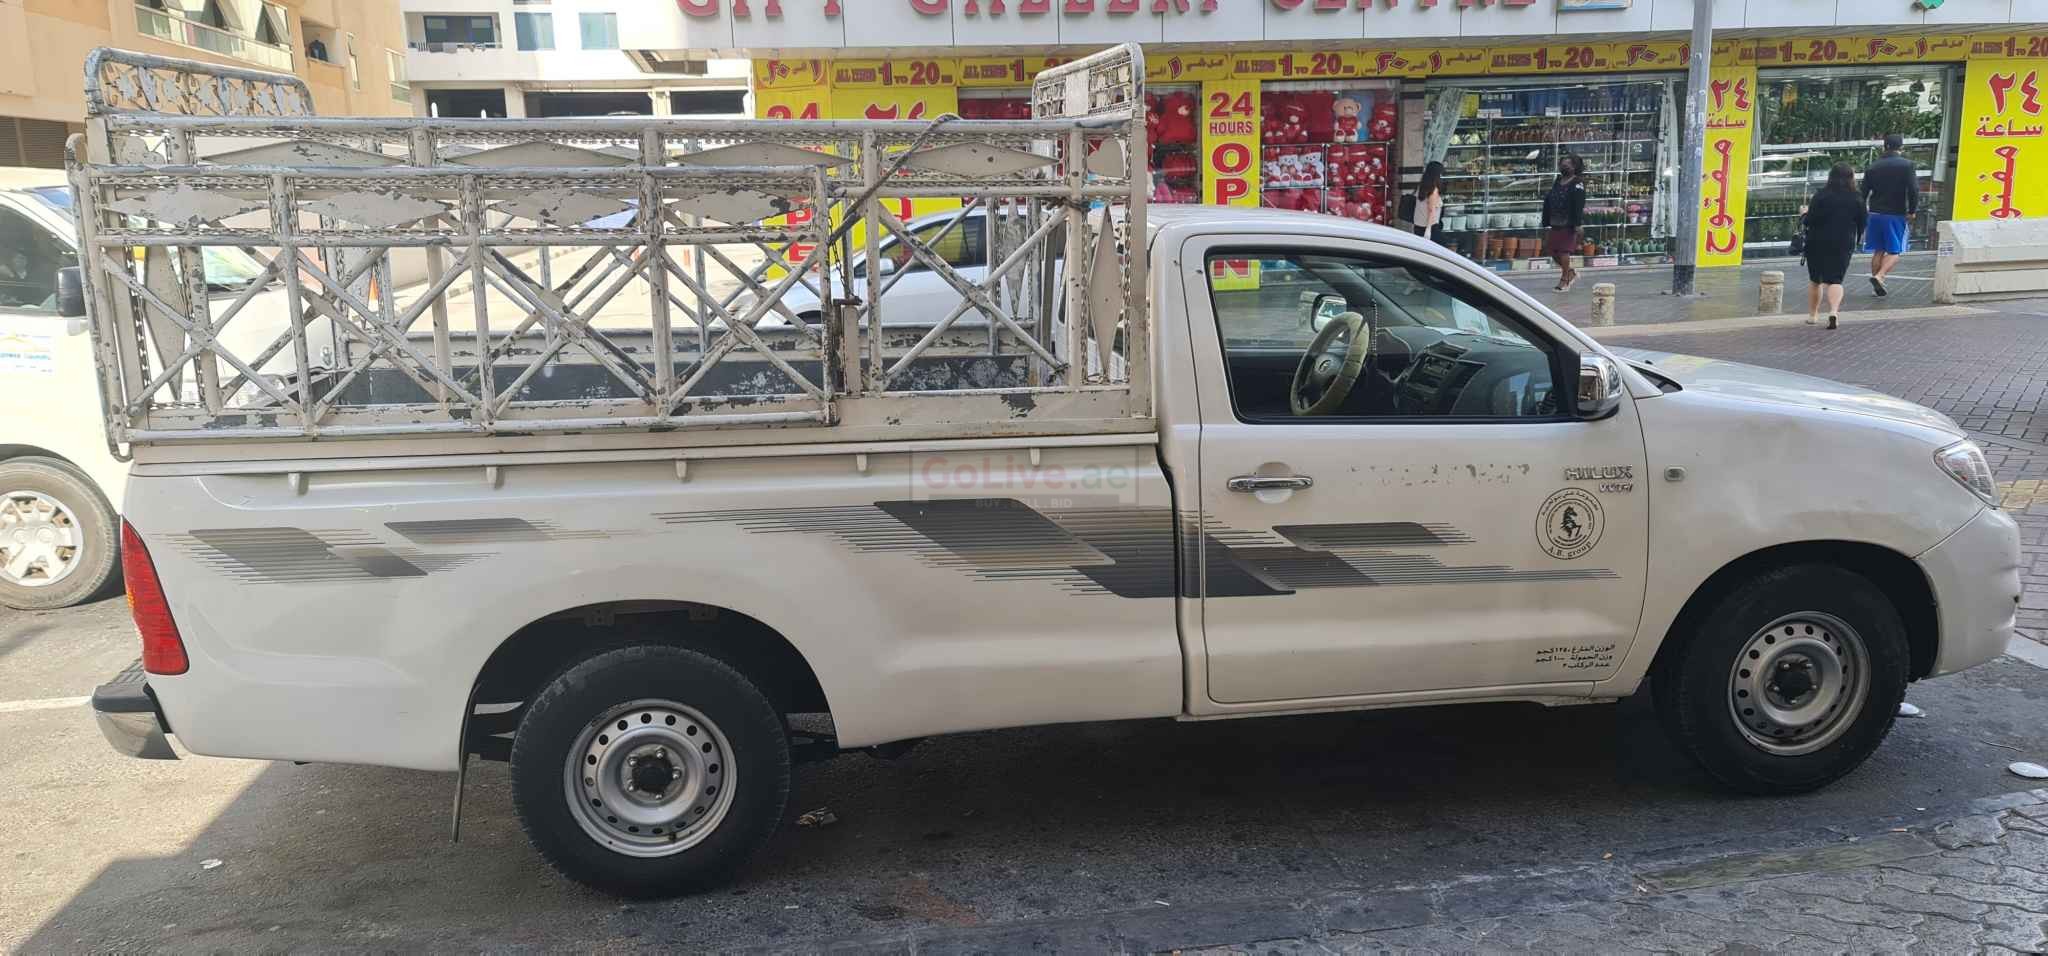 Pickup truck for rent in Dubai town city 050 357 1542